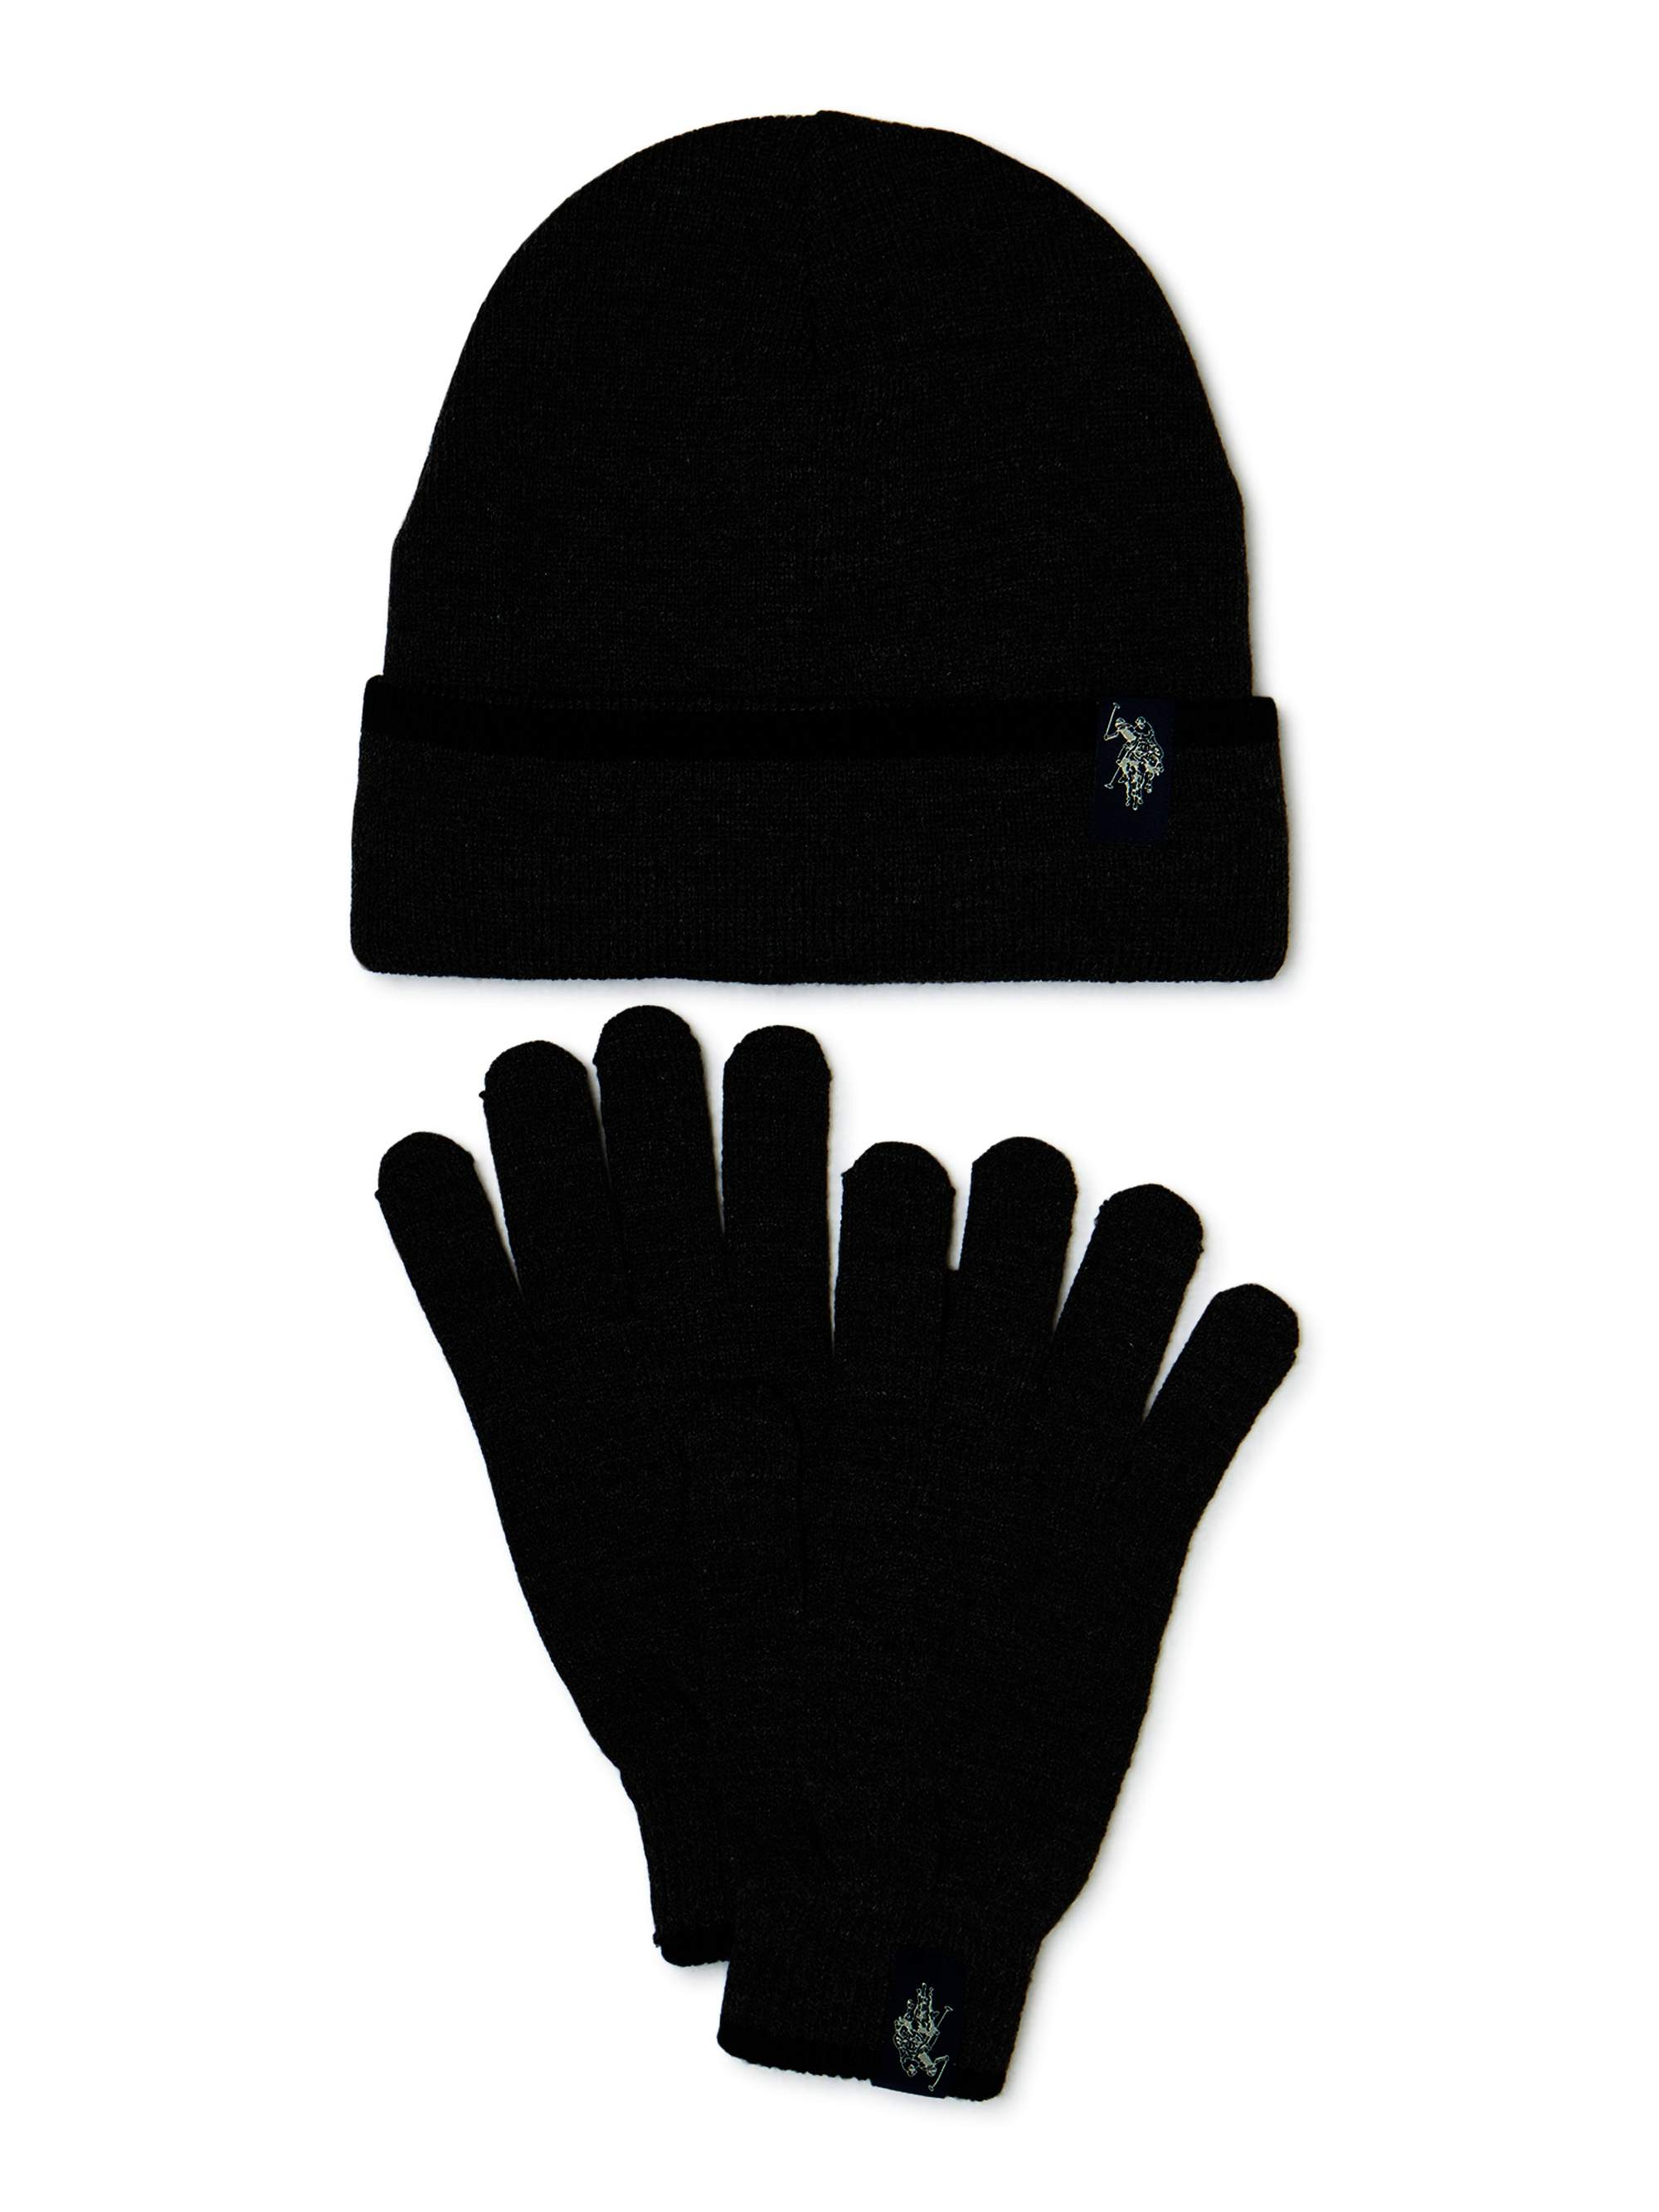 U.S. Polo Assn. Men's UPSA Solid Sherpa Lined Beanie and Glove Set - image 1 of 1